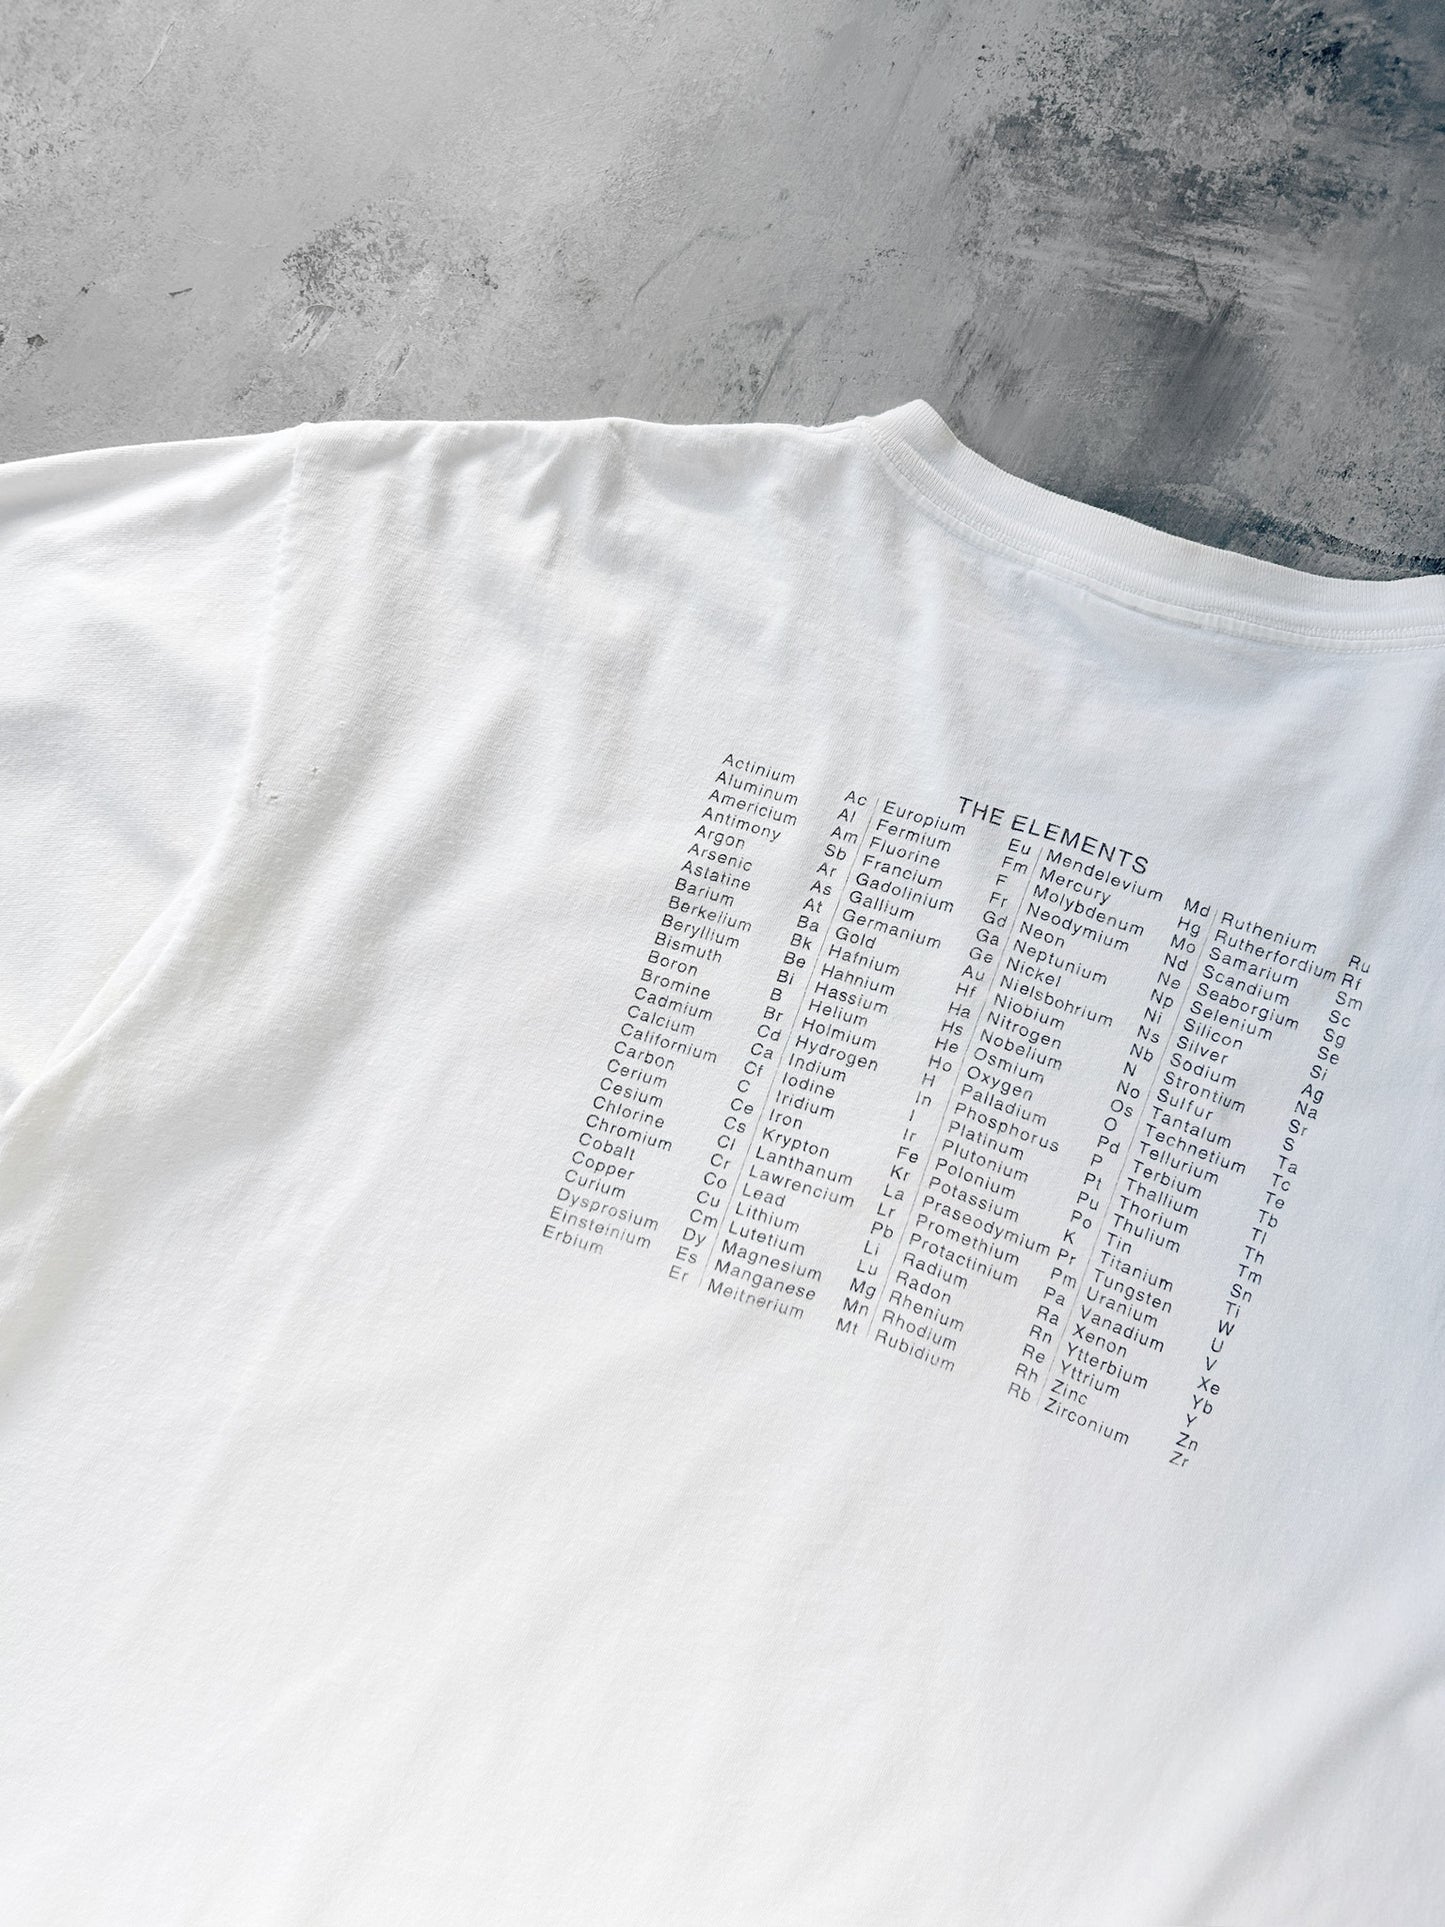 Periodic Table of Elements T-Shirt '94 - XL